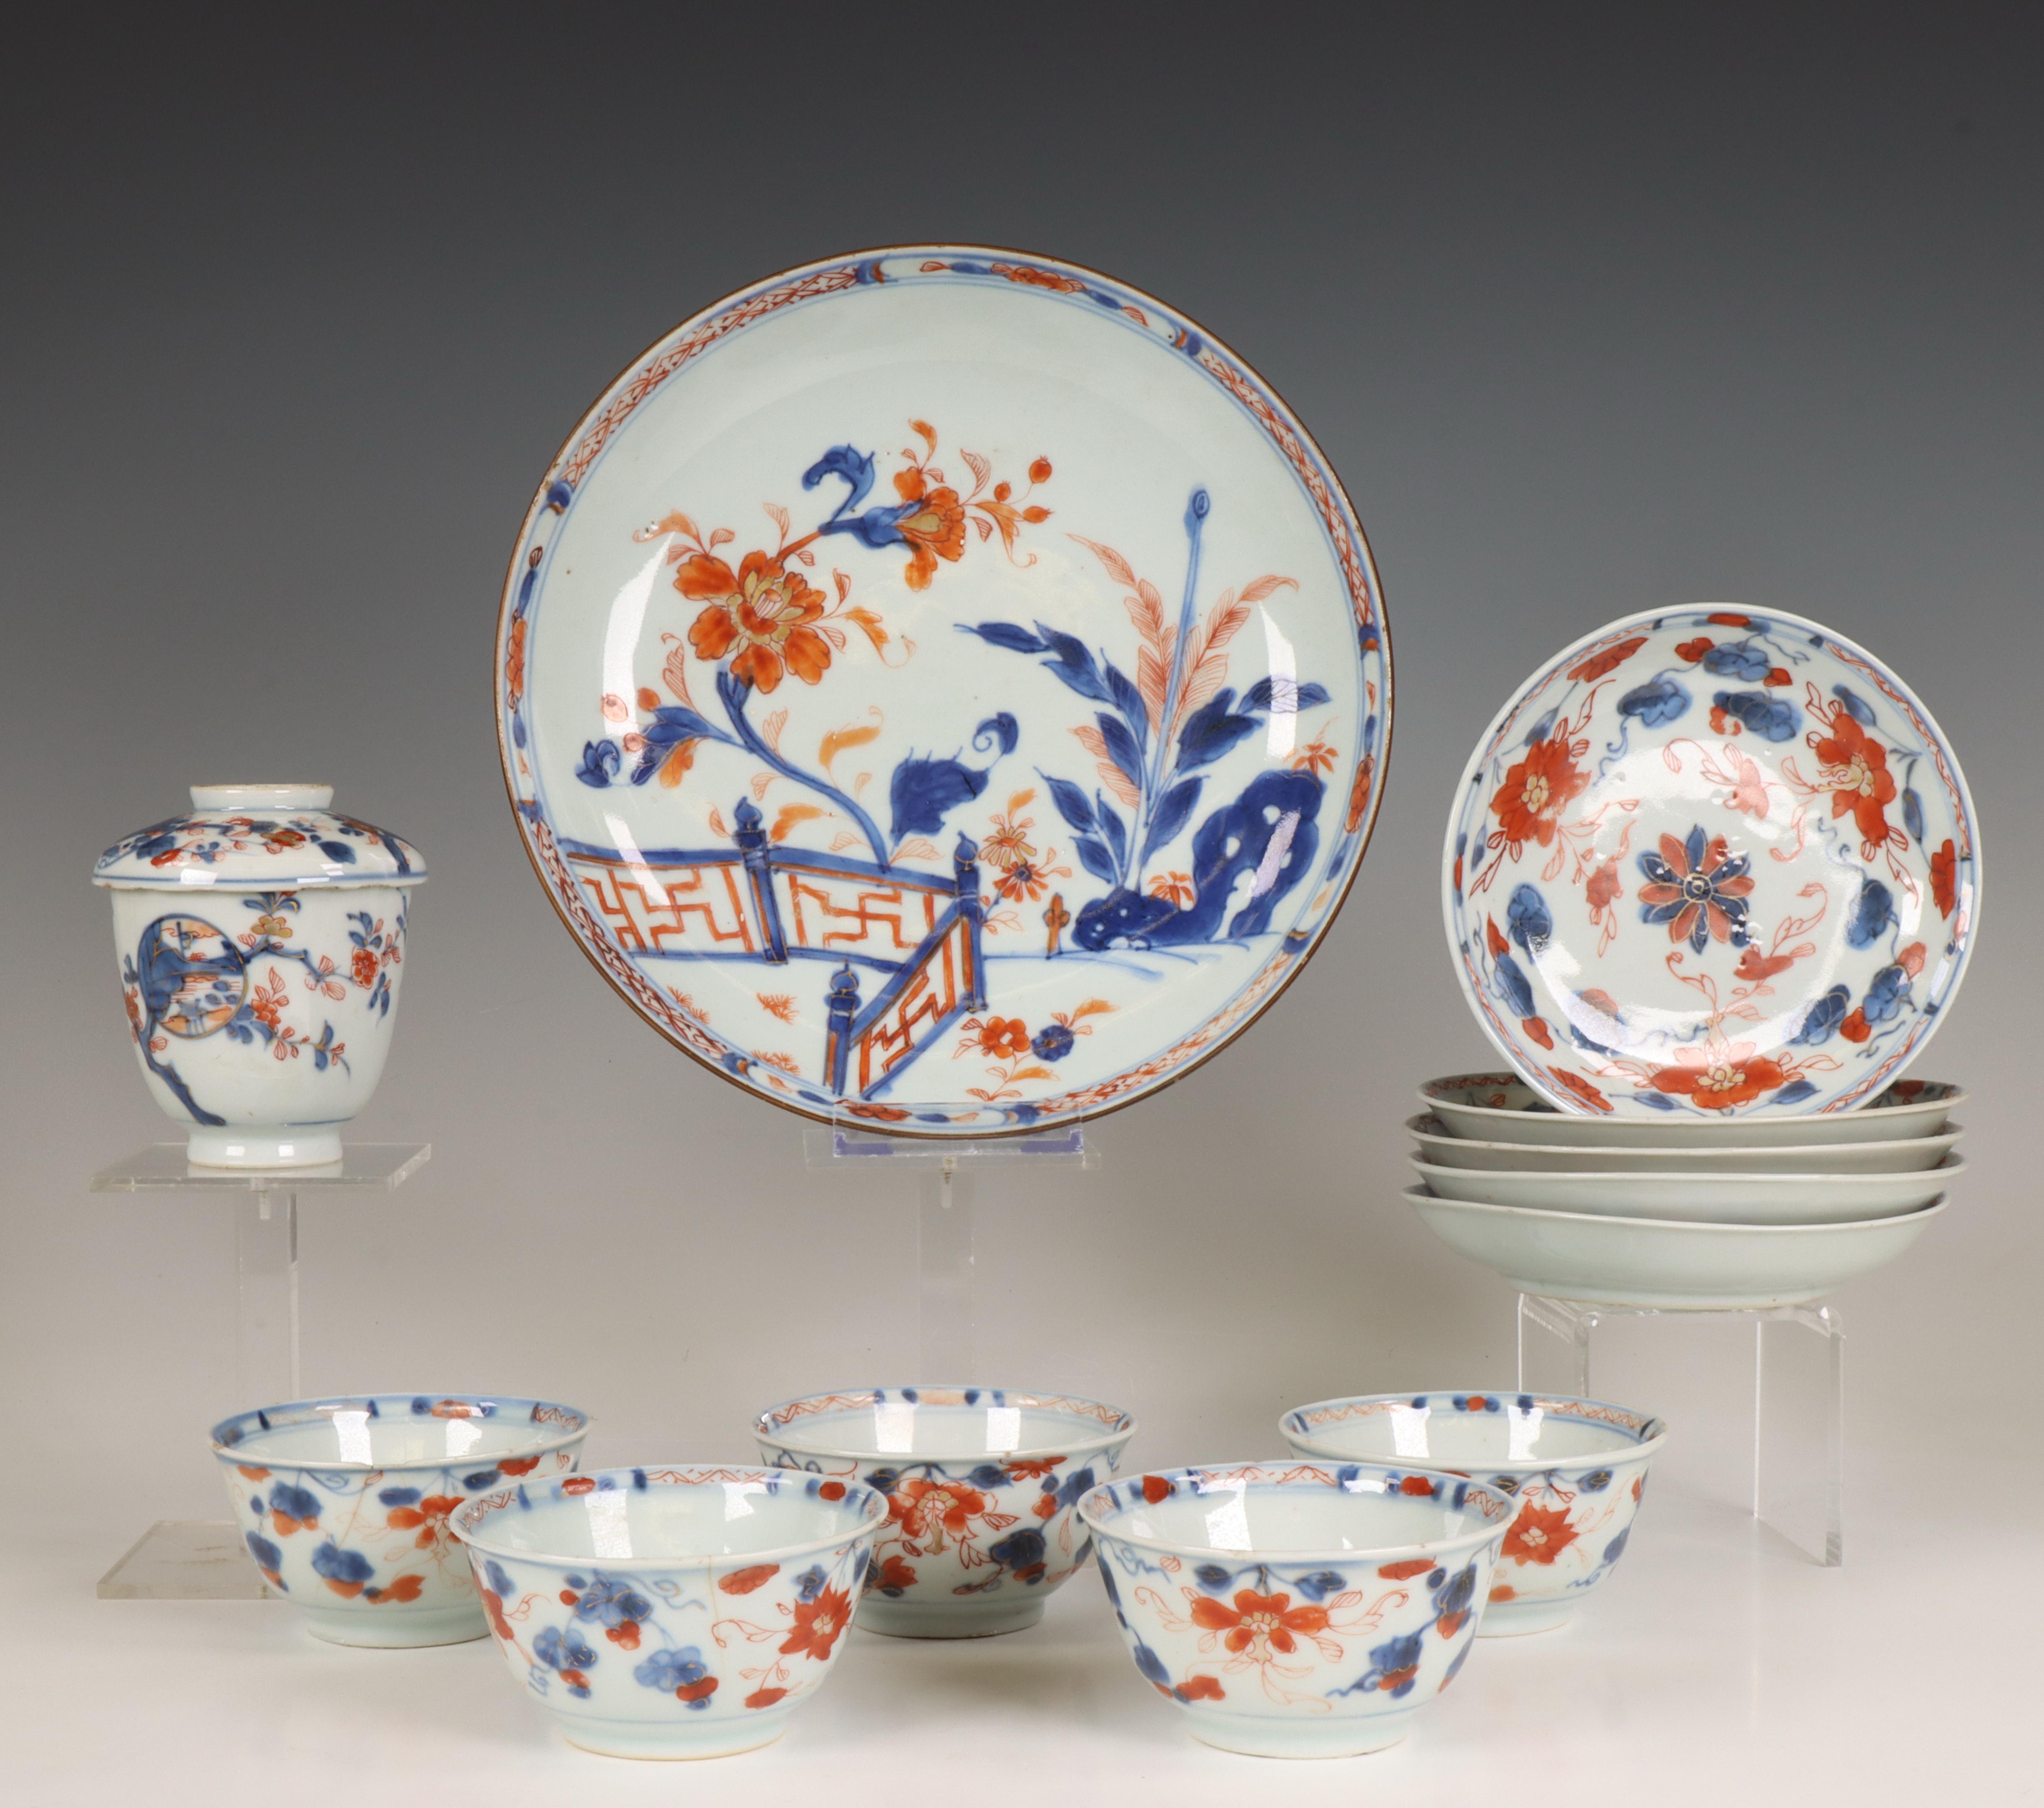 Japan, a collection of Imari porcelain, 18th century,